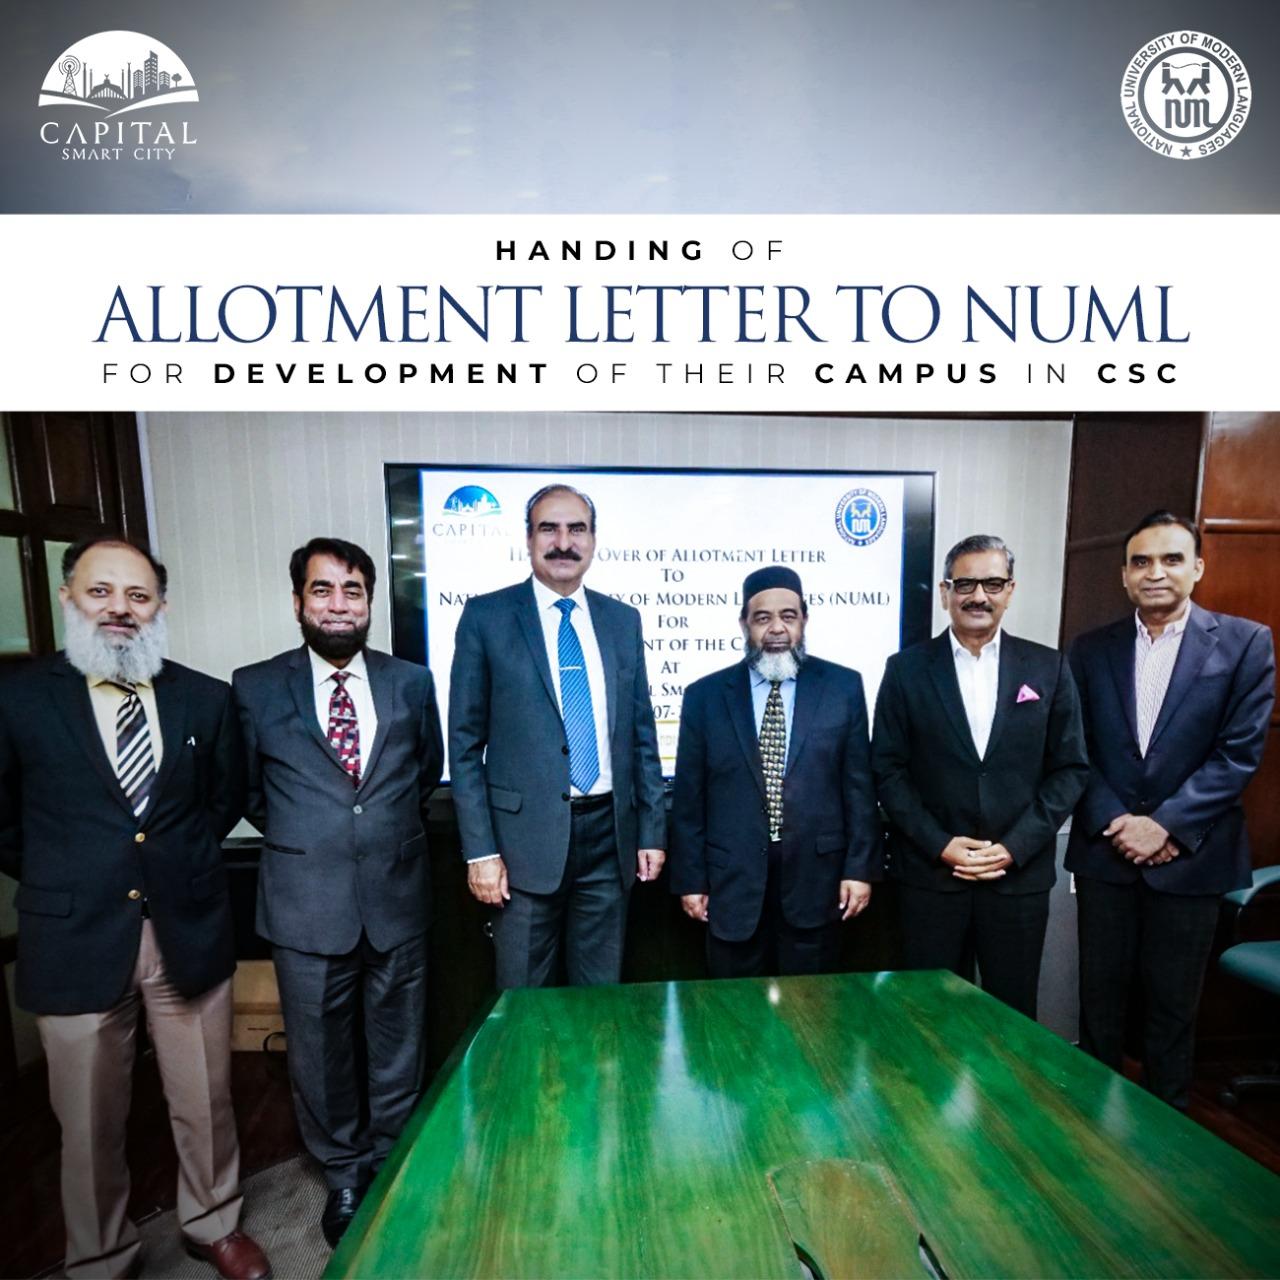 Handing Of Allotment Letter to NUML for Development of their Campus in Capital Smart City